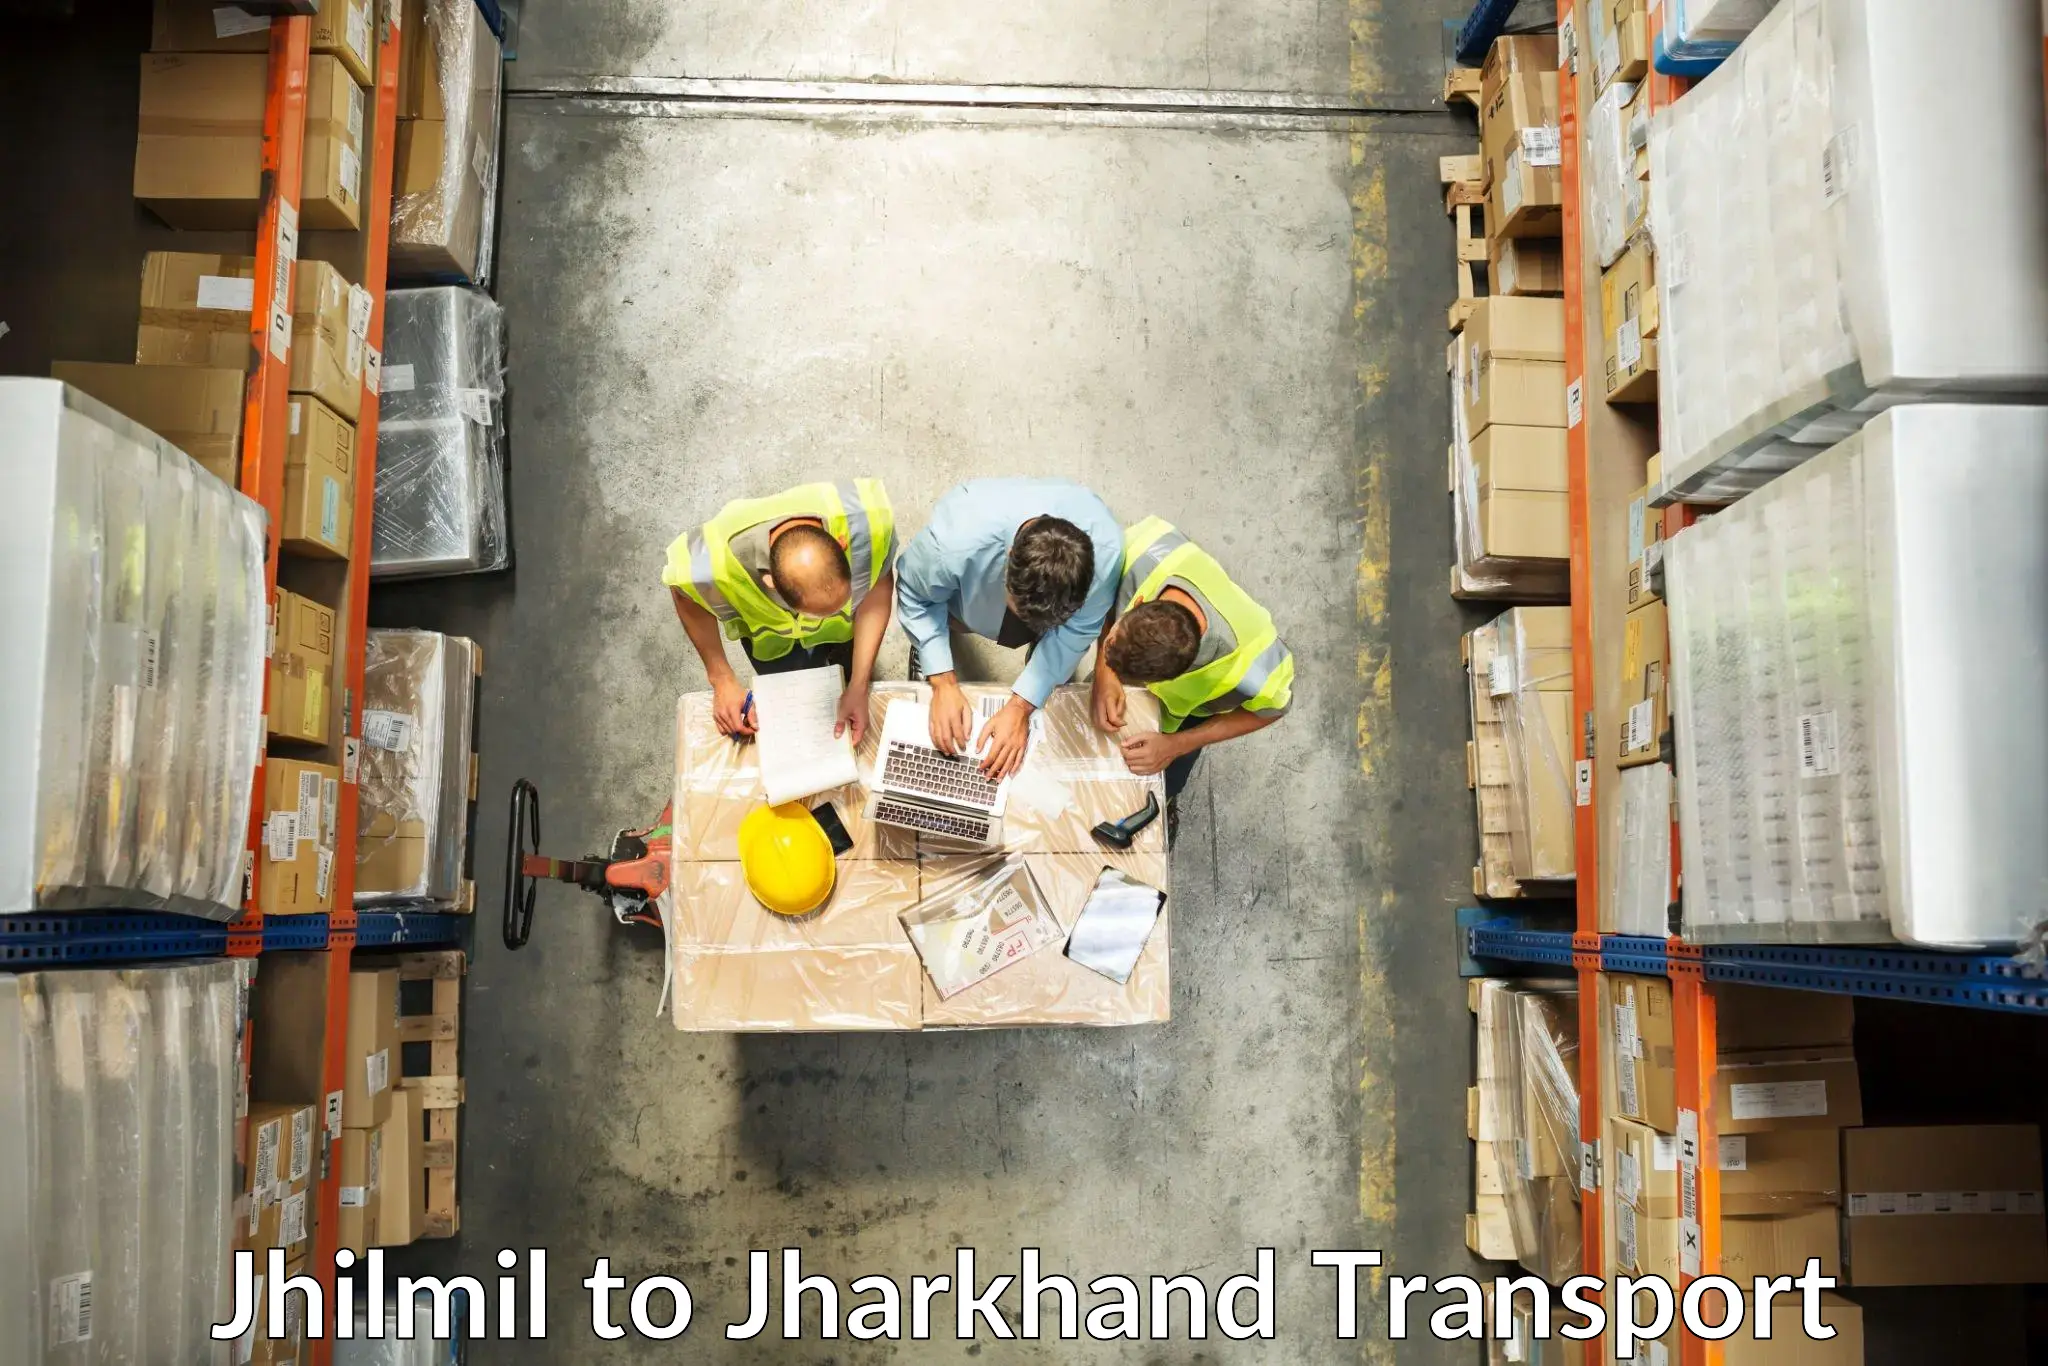 Cargo train transport services Jhilmil to Dhanbad